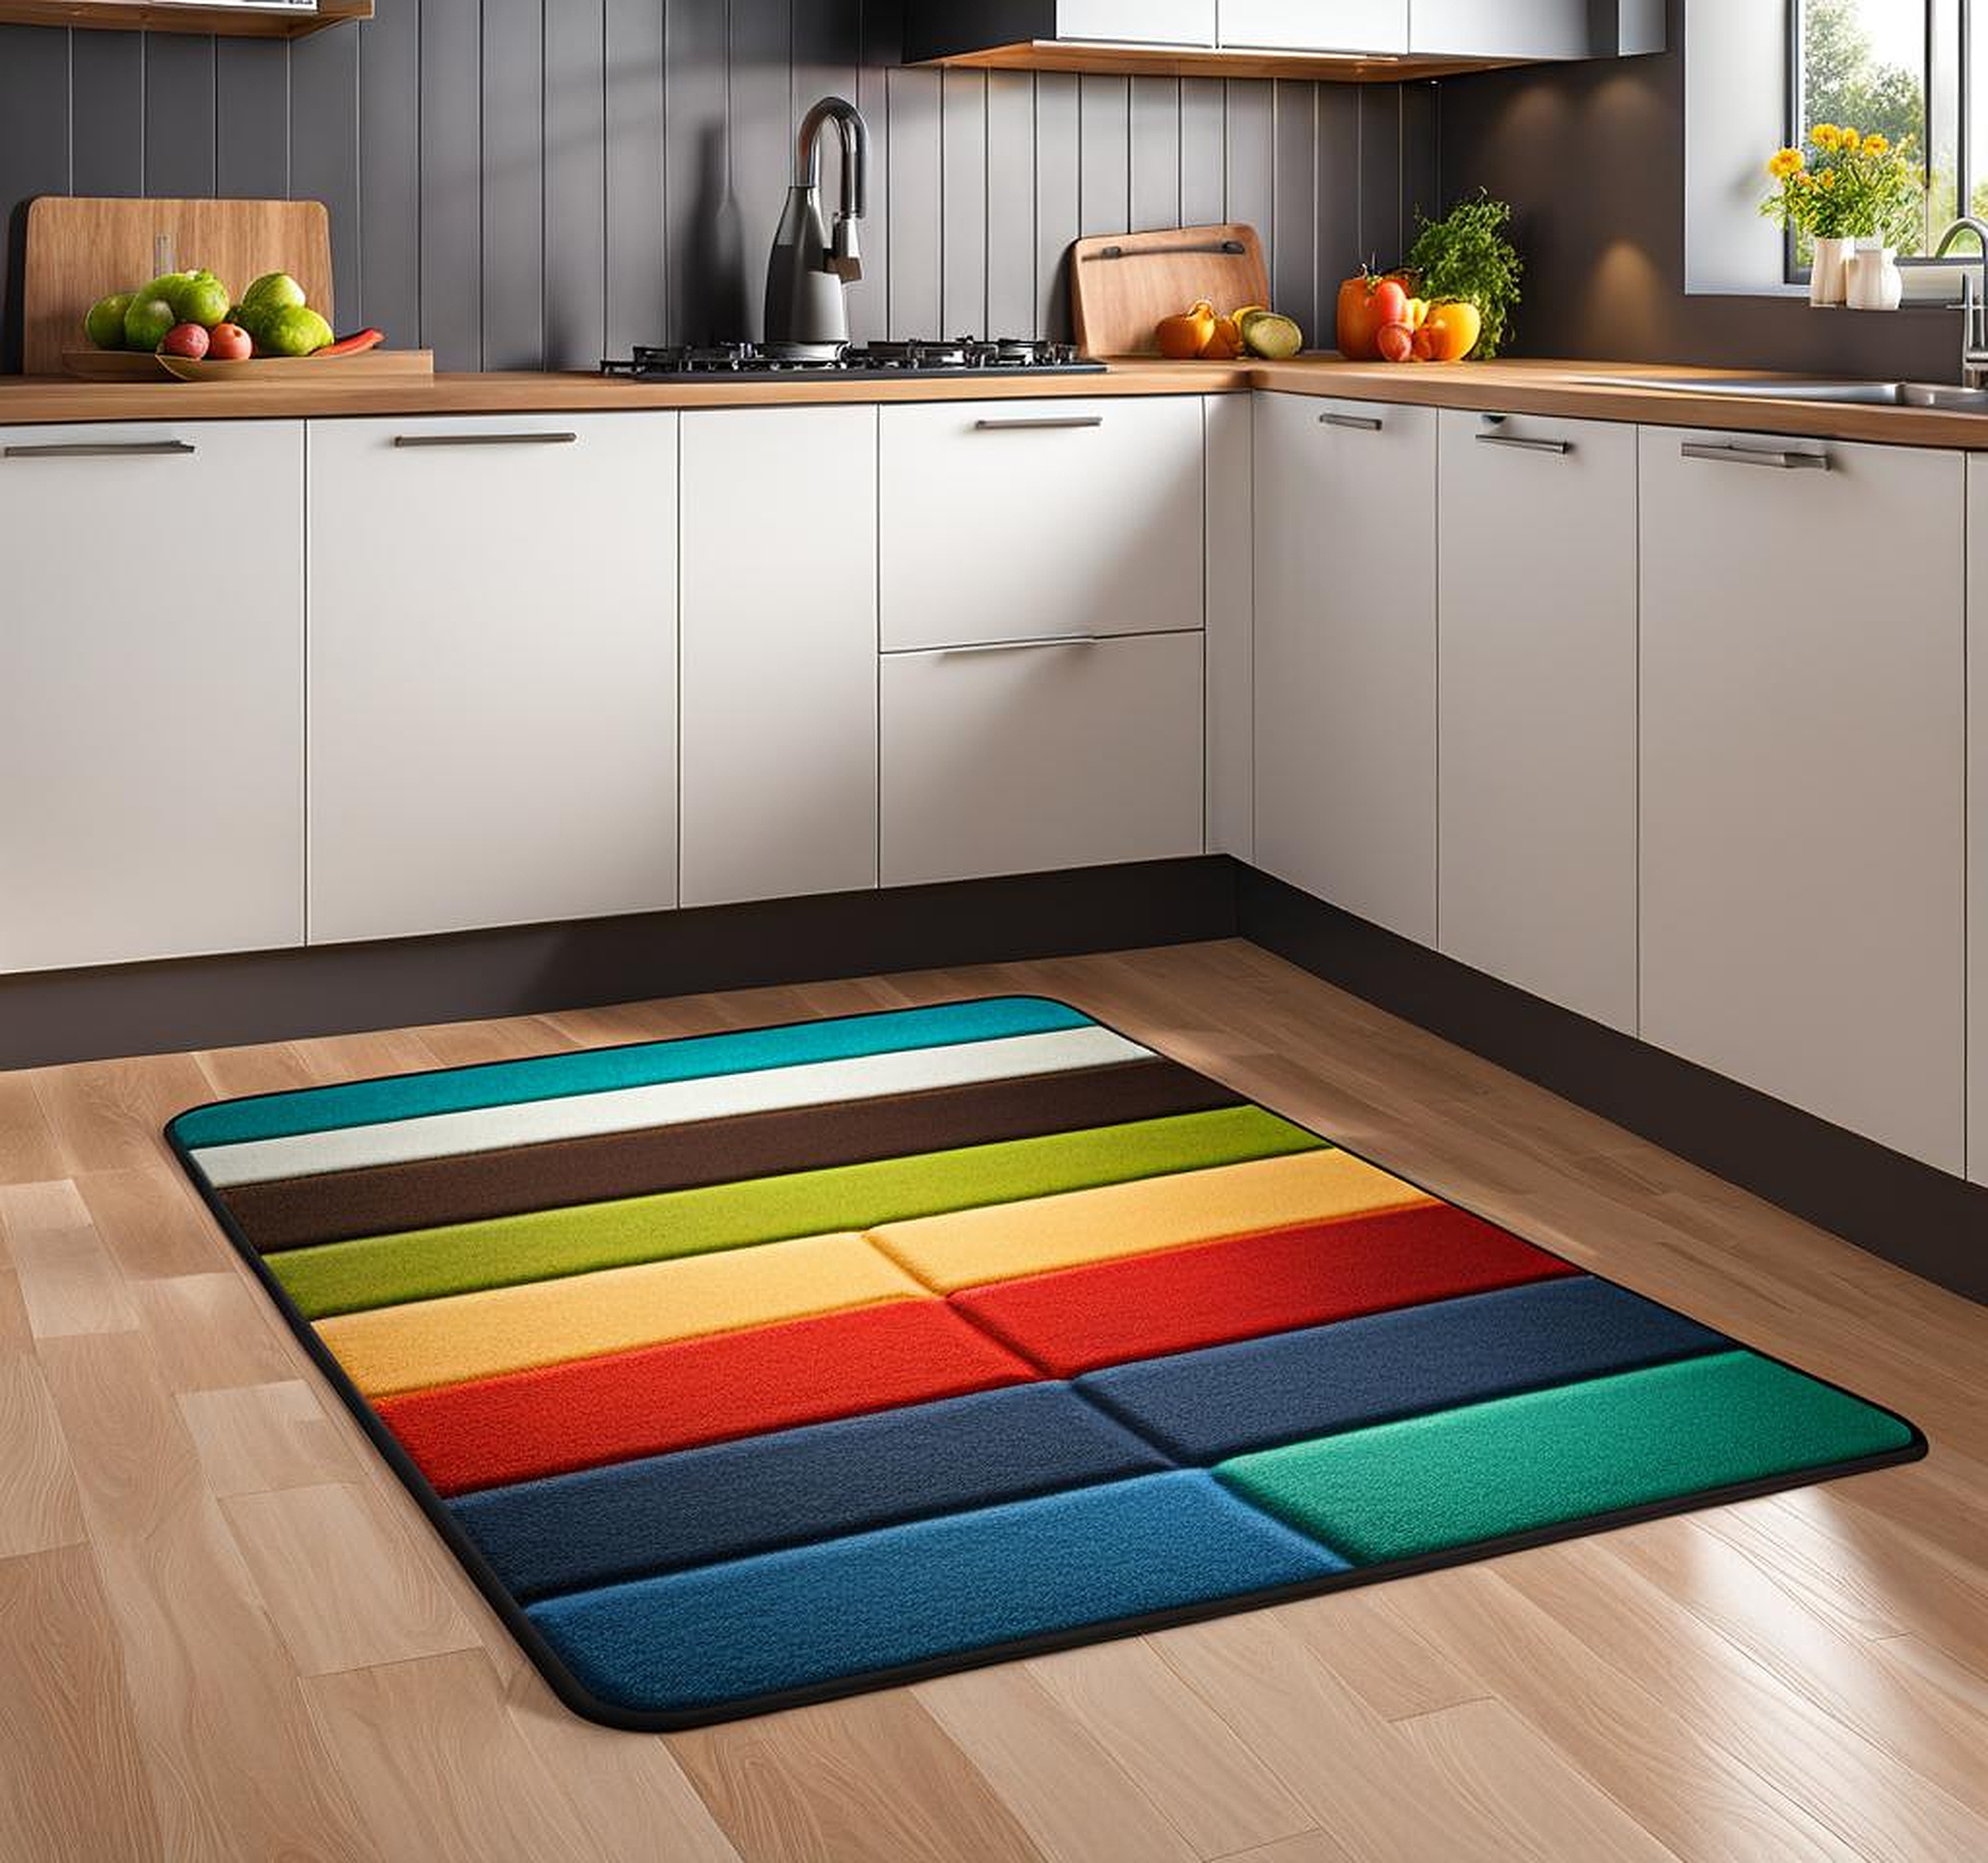 comfort mats for the kitchen